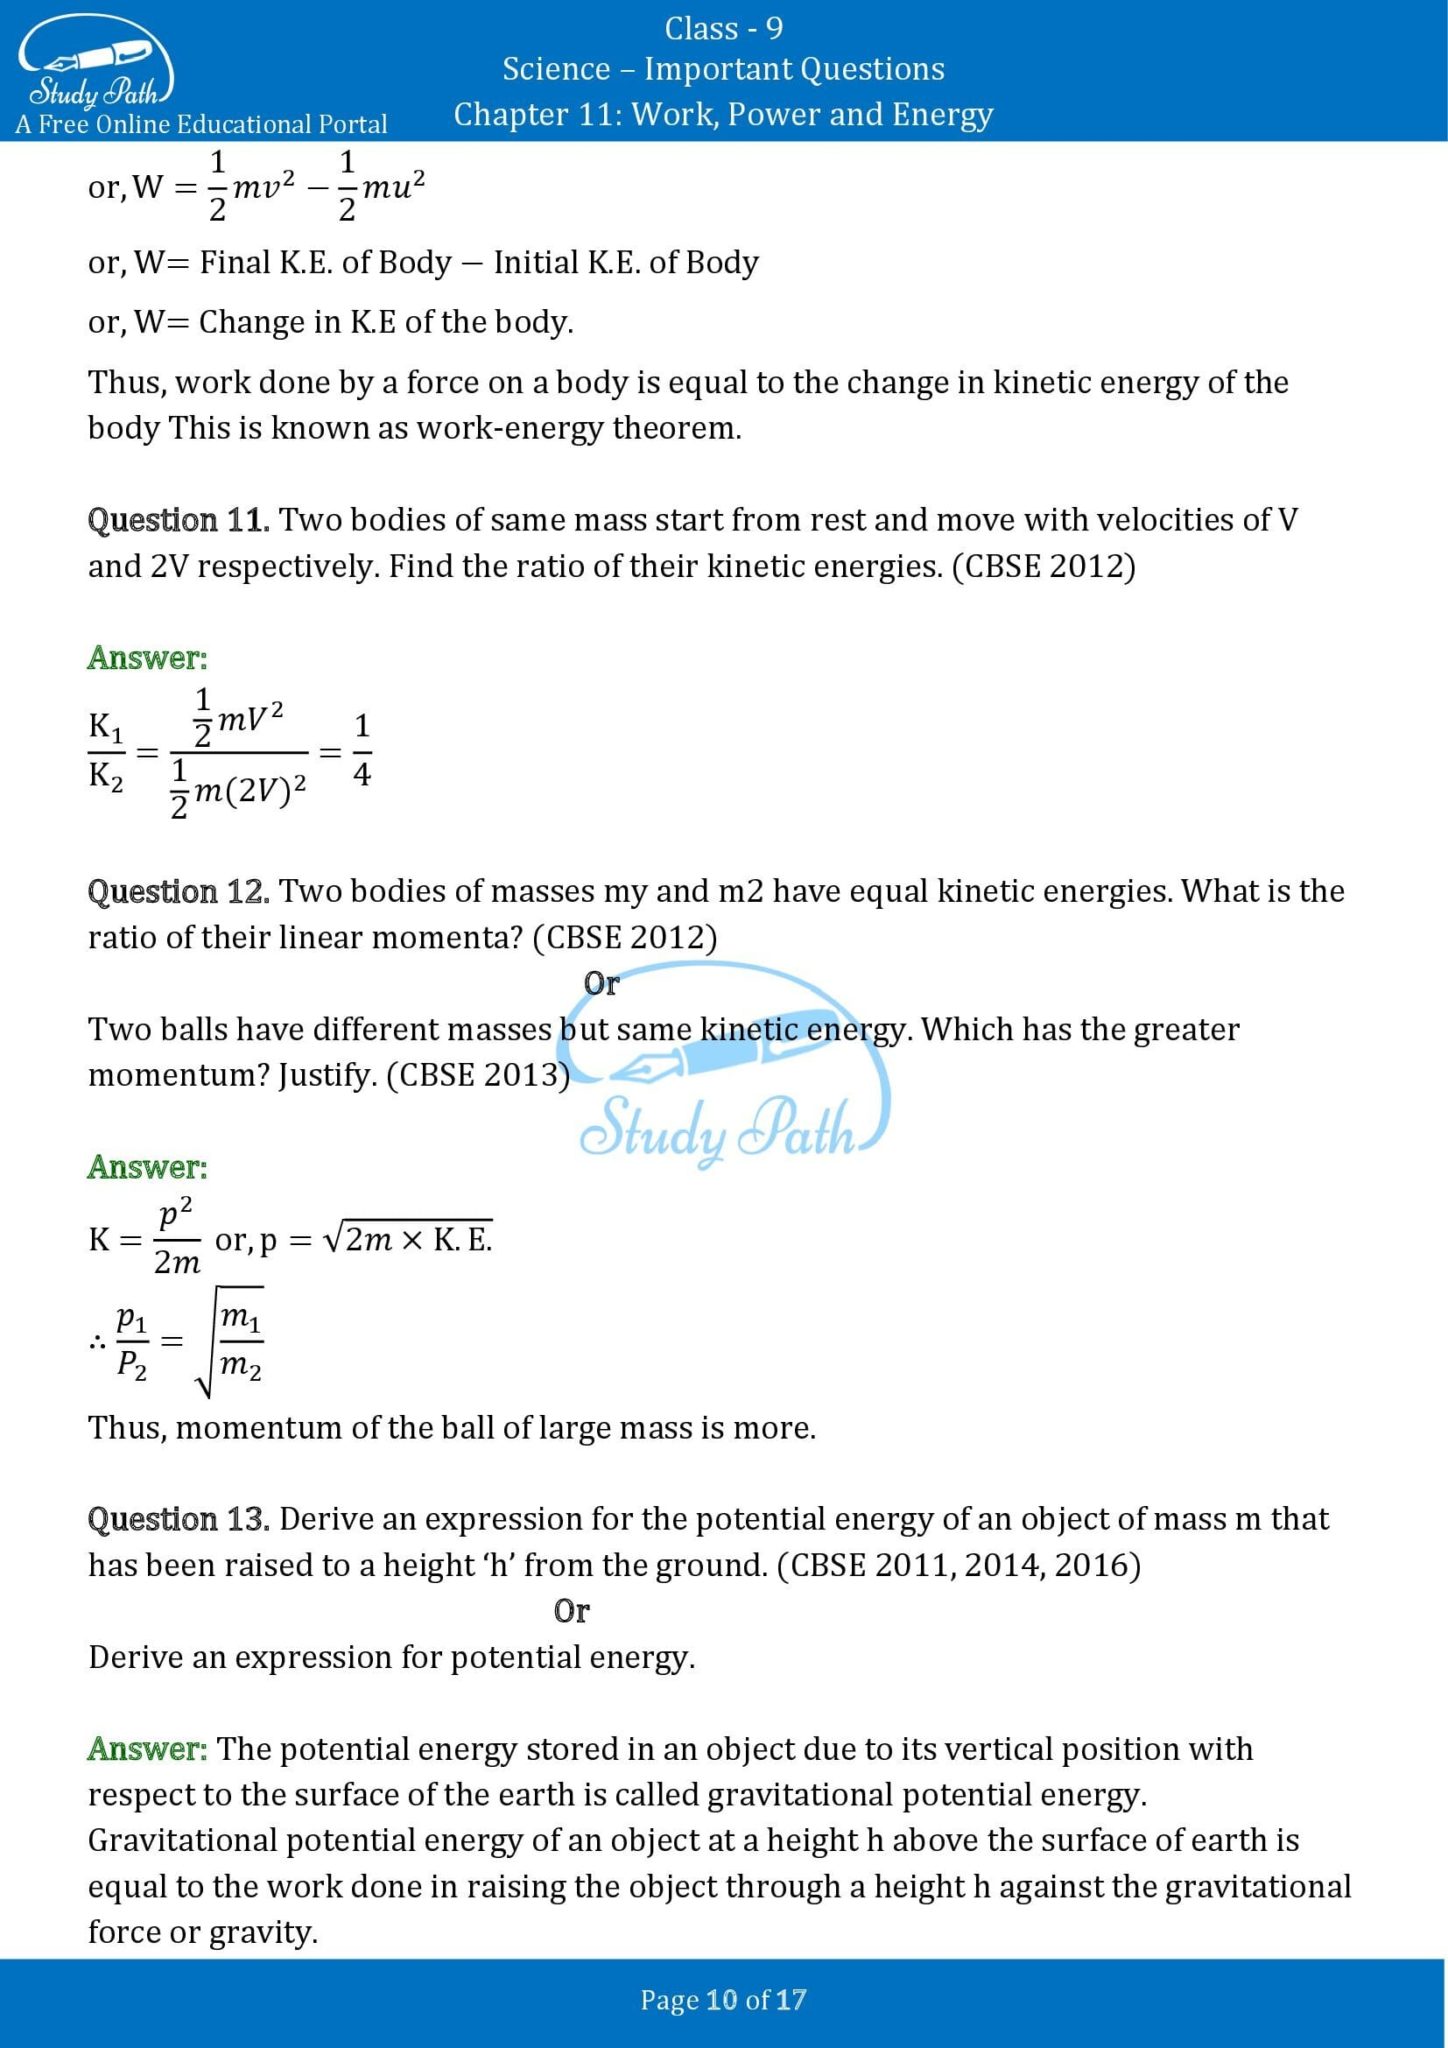 case study questions class 9 science chapter 11